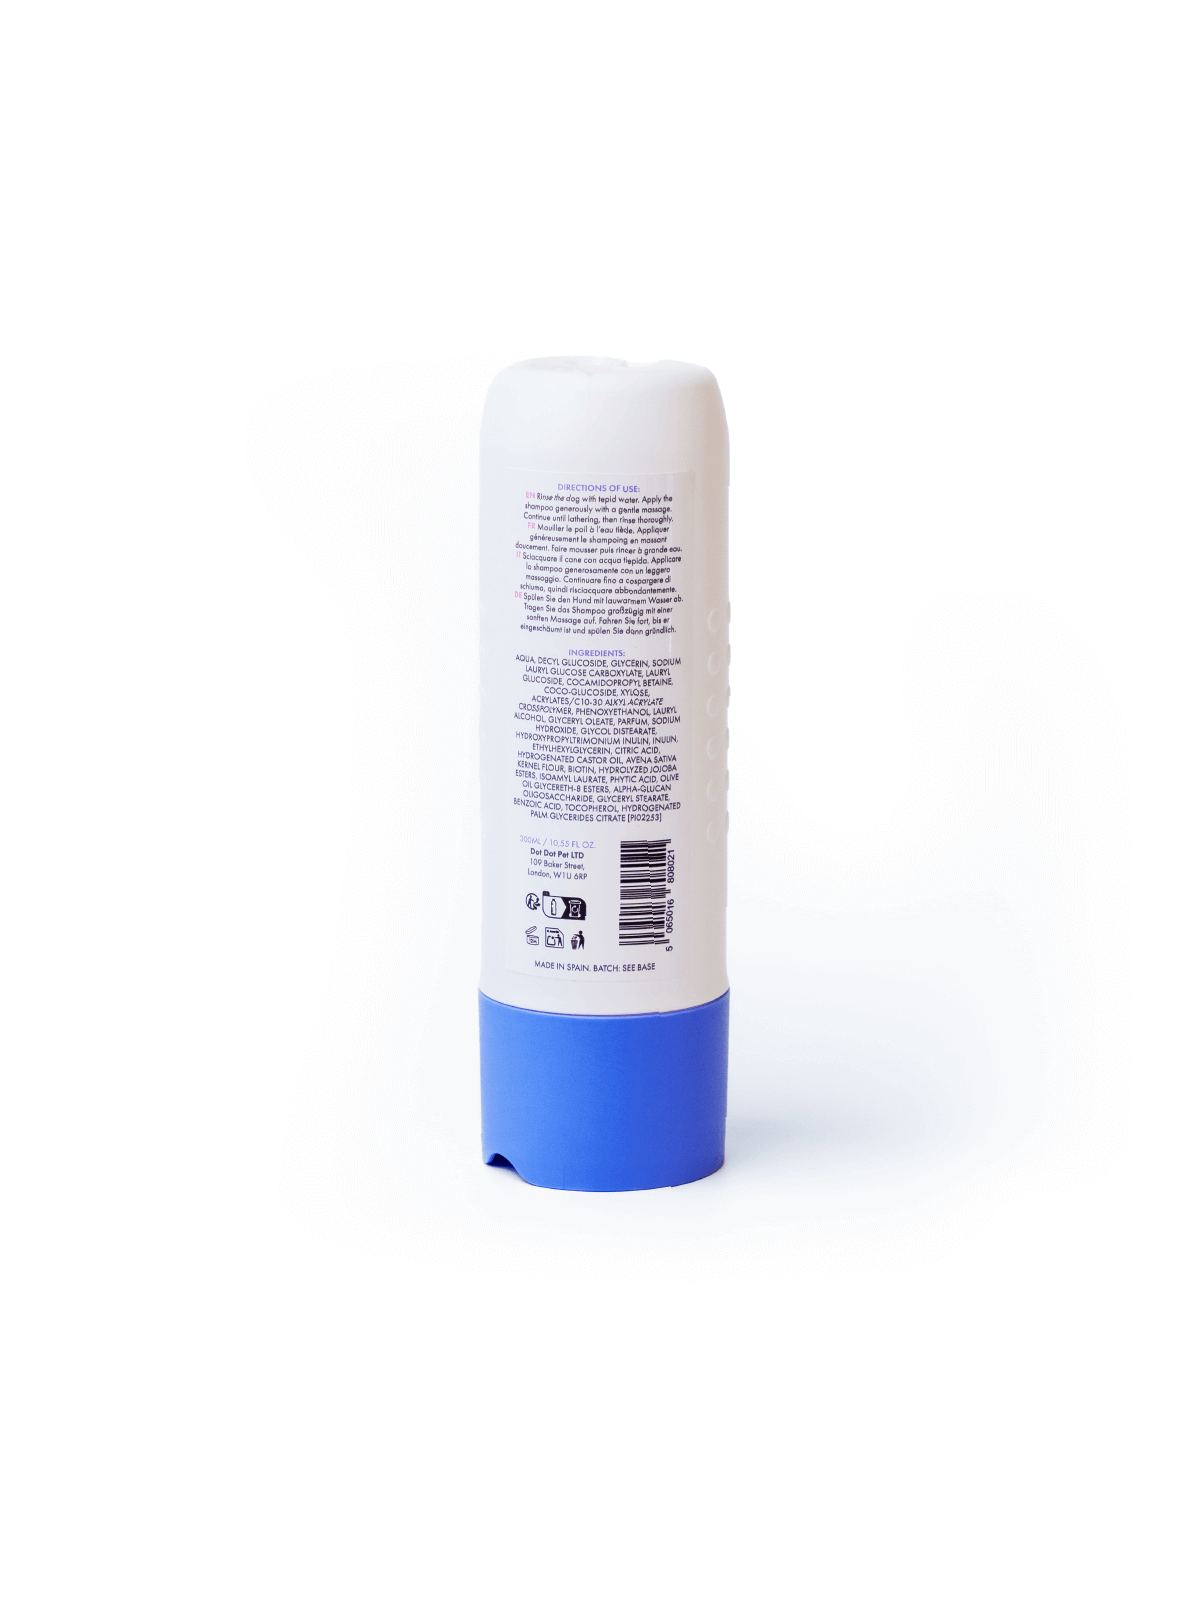 Back of the 3 in 1 volumising conditioning shampoo for curly haired dogs with prebiotic for healthy skin, vegan no nasties formulation, dog loved fragrance for calm bath time, neofresh technology for smelly dogs